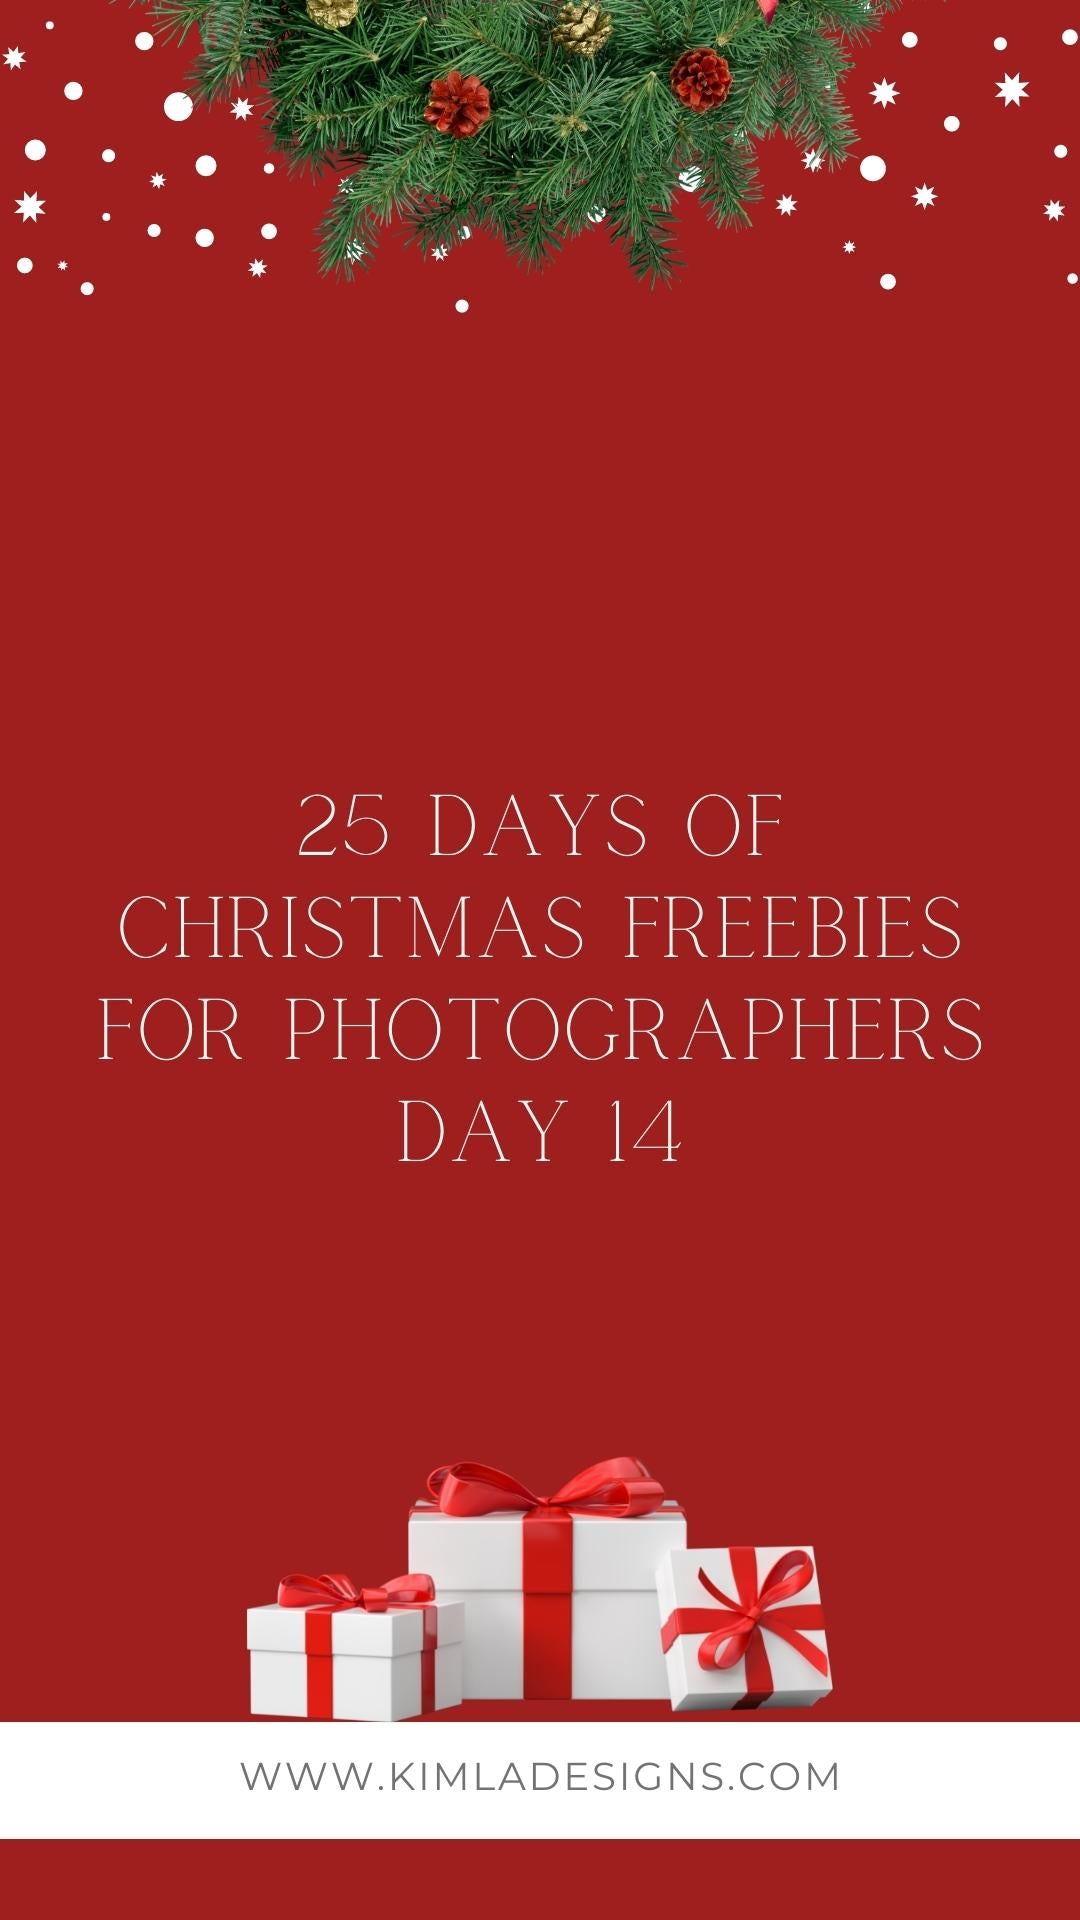 25 Days of Christmas Freebies day 14th